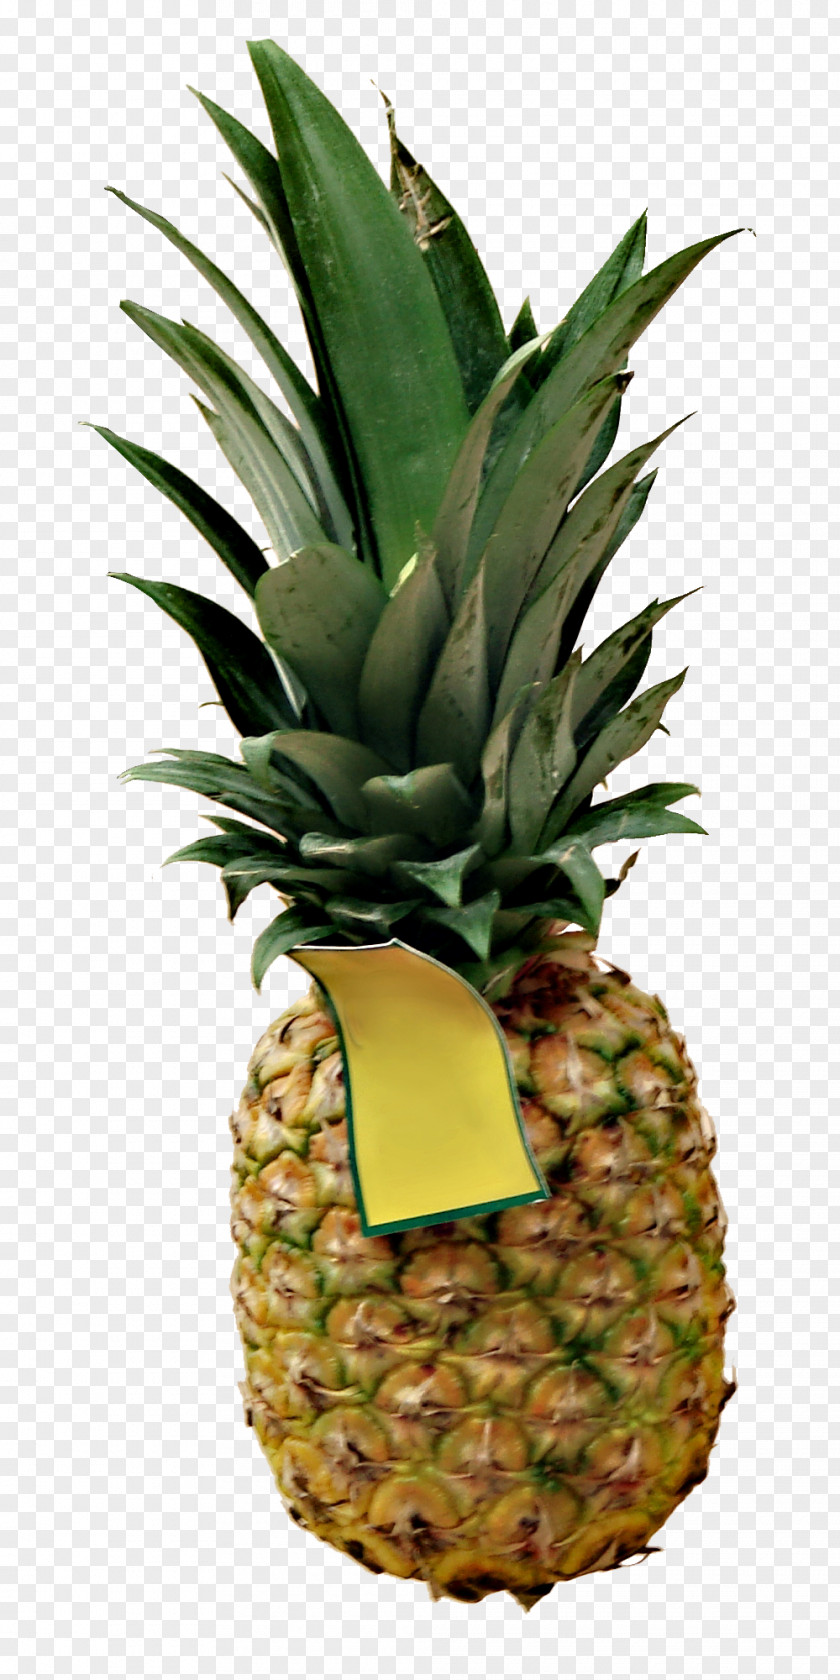 Current Pineapple Image Download Clip Art PNG